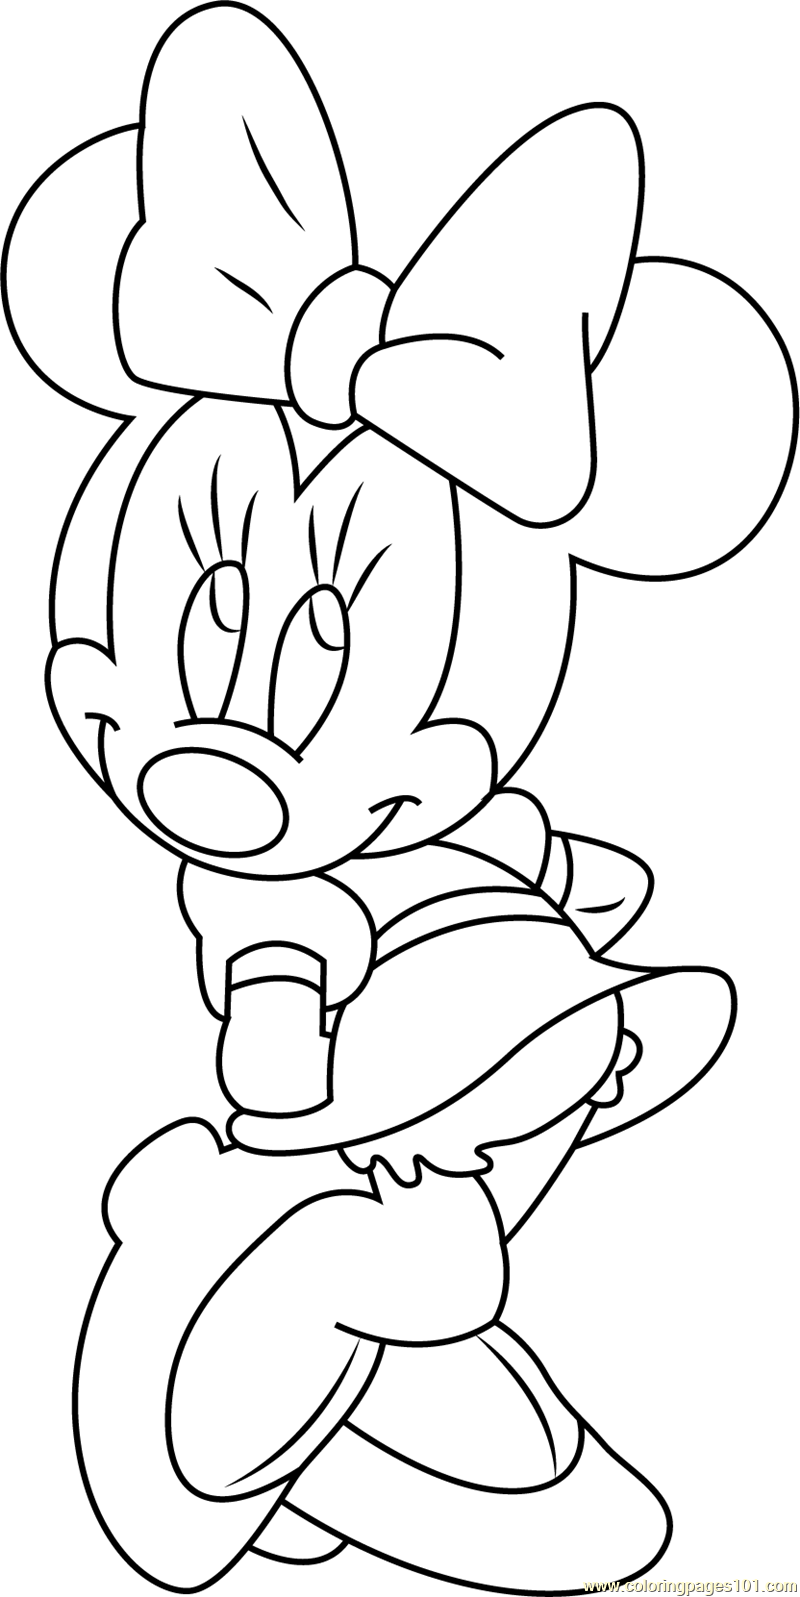 Minnie Mouse Shy Coloring Page For Kids Free Minnie Mouse Printable Coloring Pages Online For